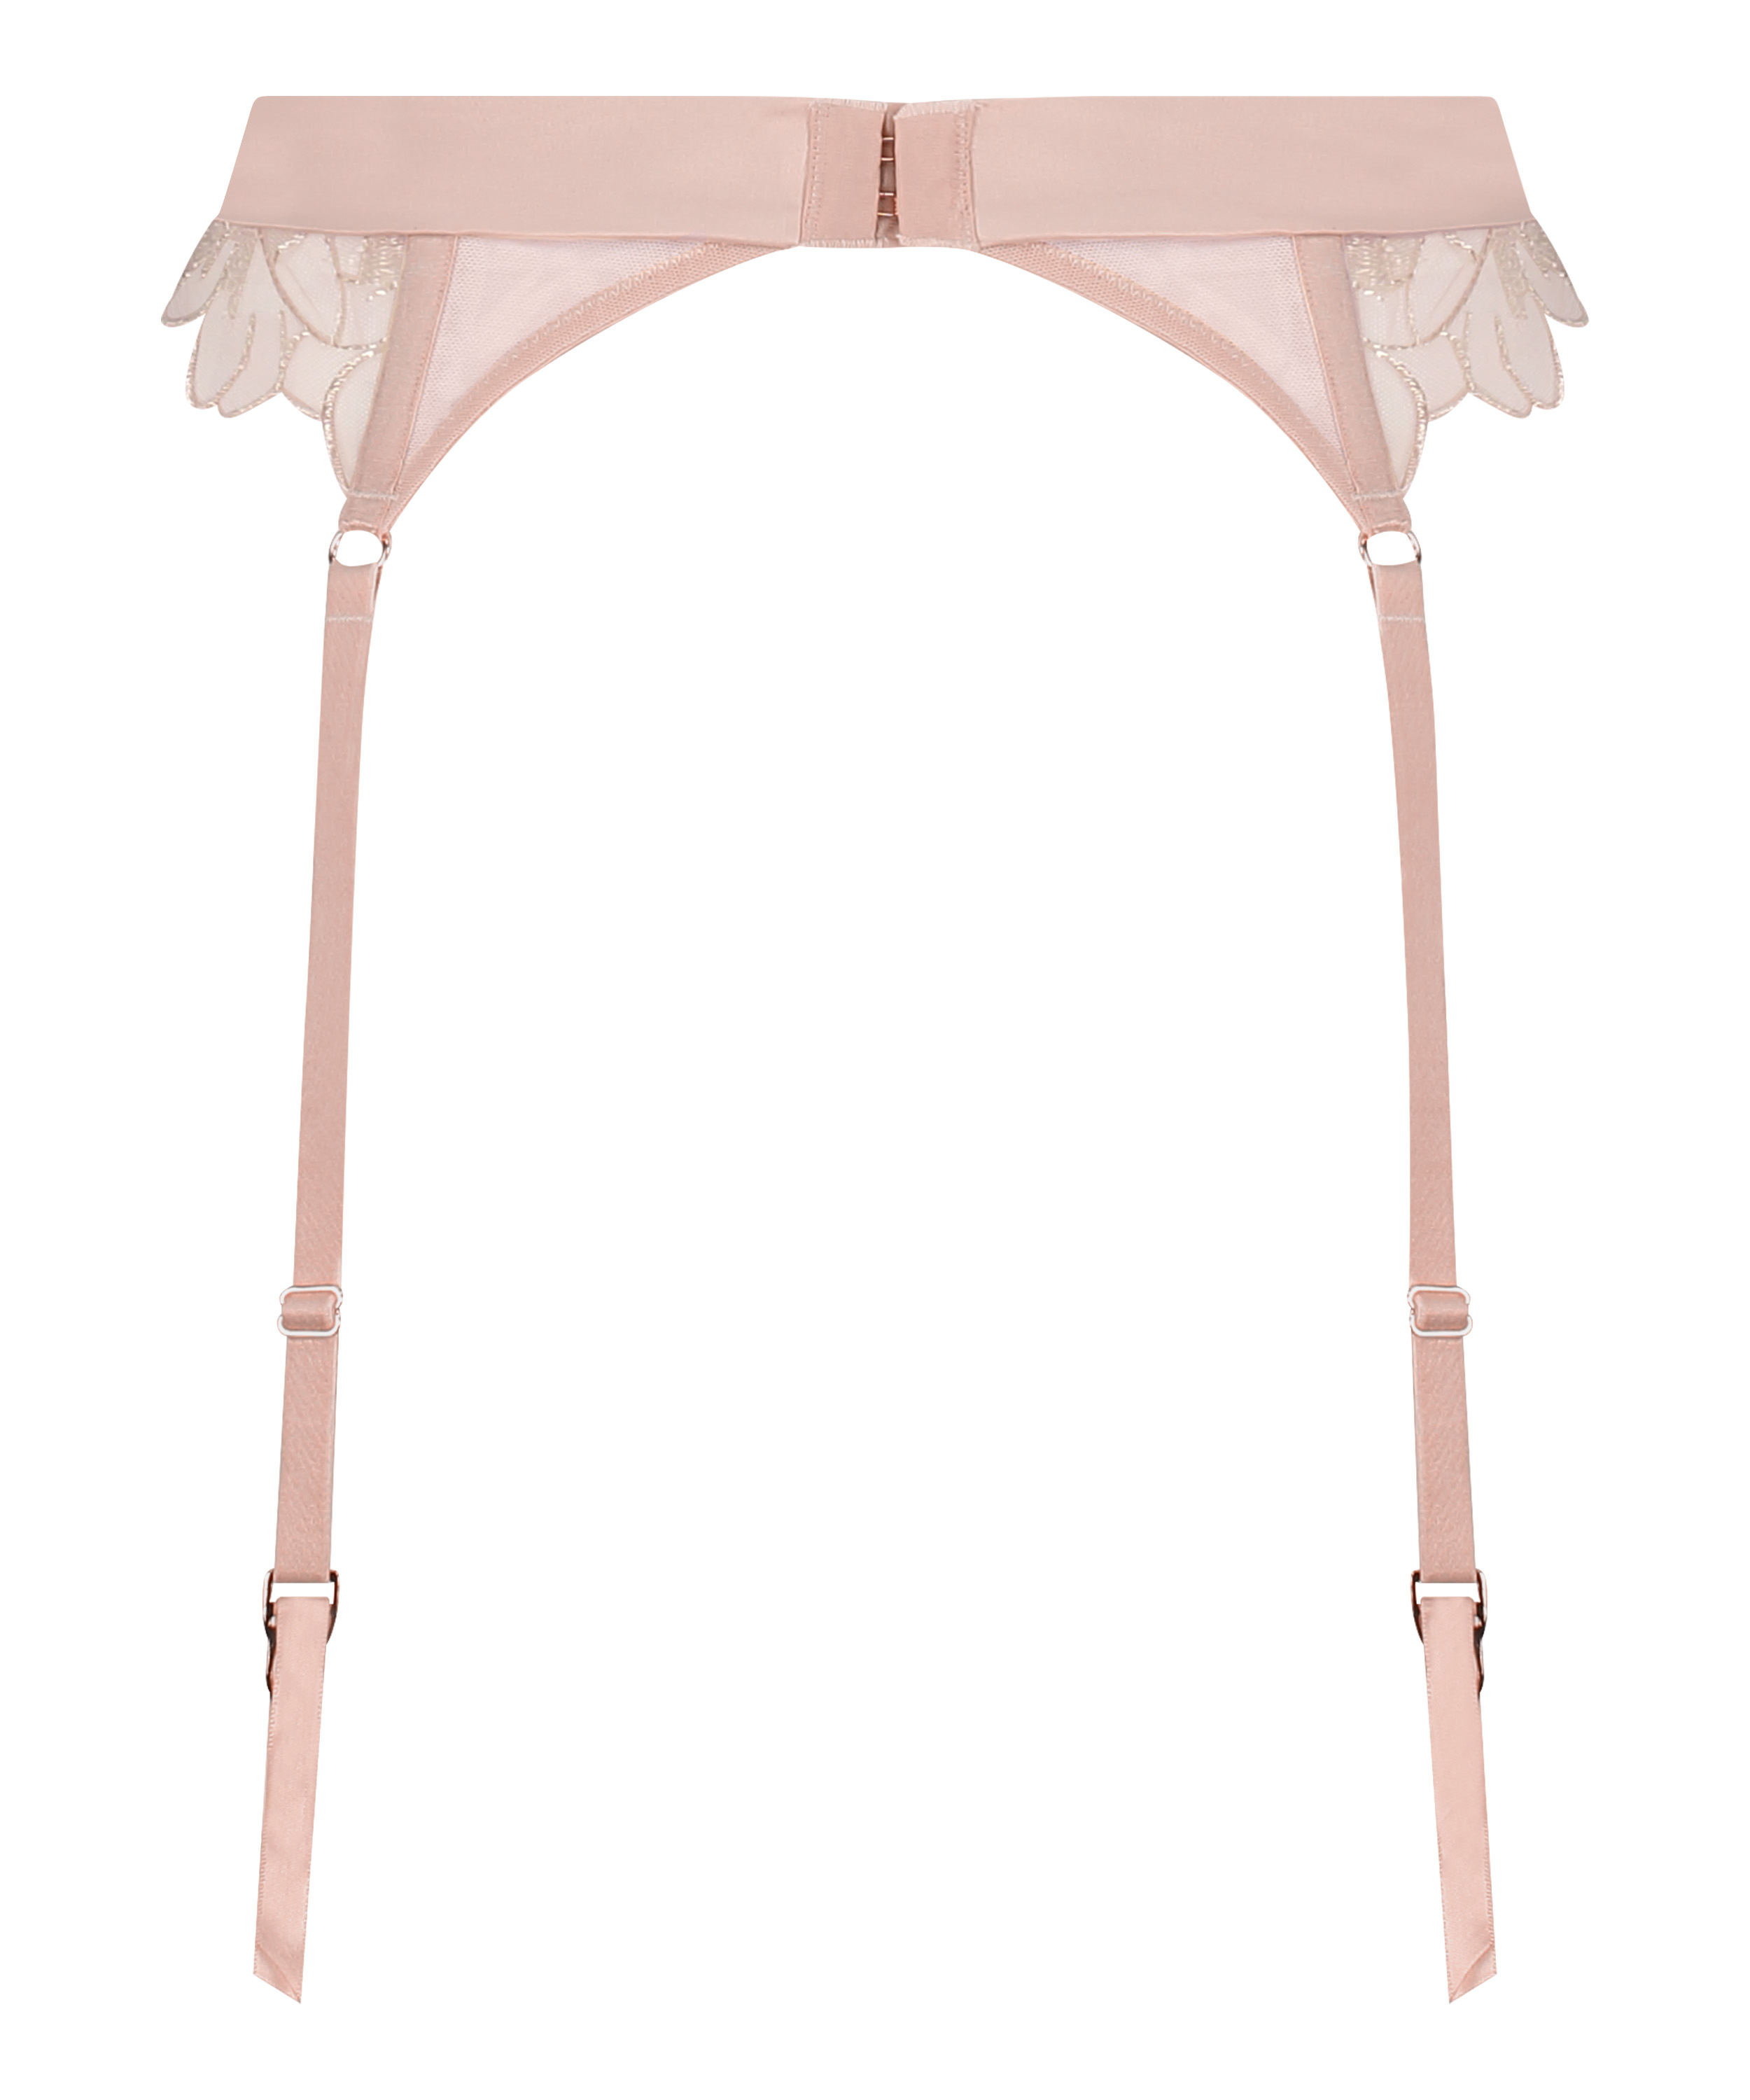 Sher Suspenders, Pink, main